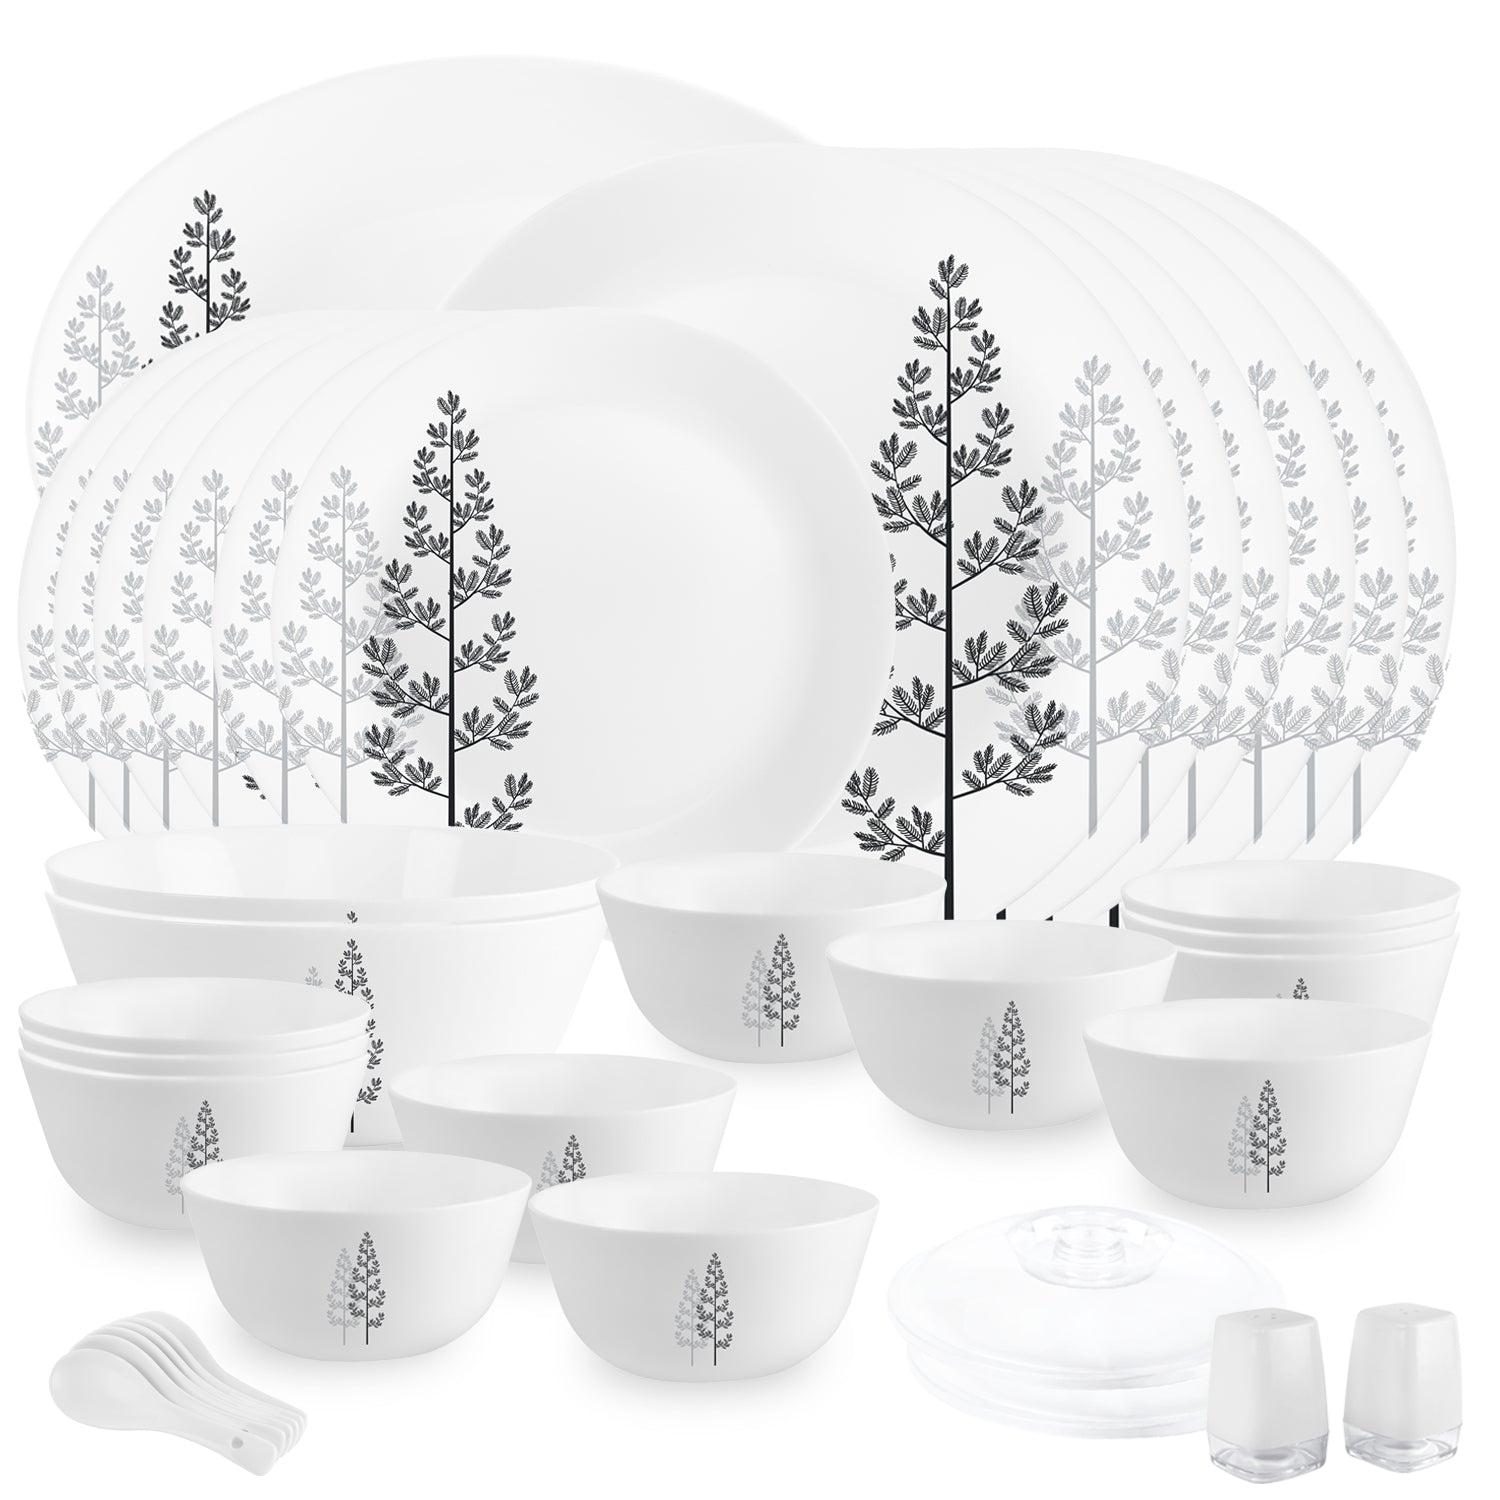 A 37-piece Opalware Dinner set: Plates, bowls, and serveware adorned with delicate floral designs for elegant dining